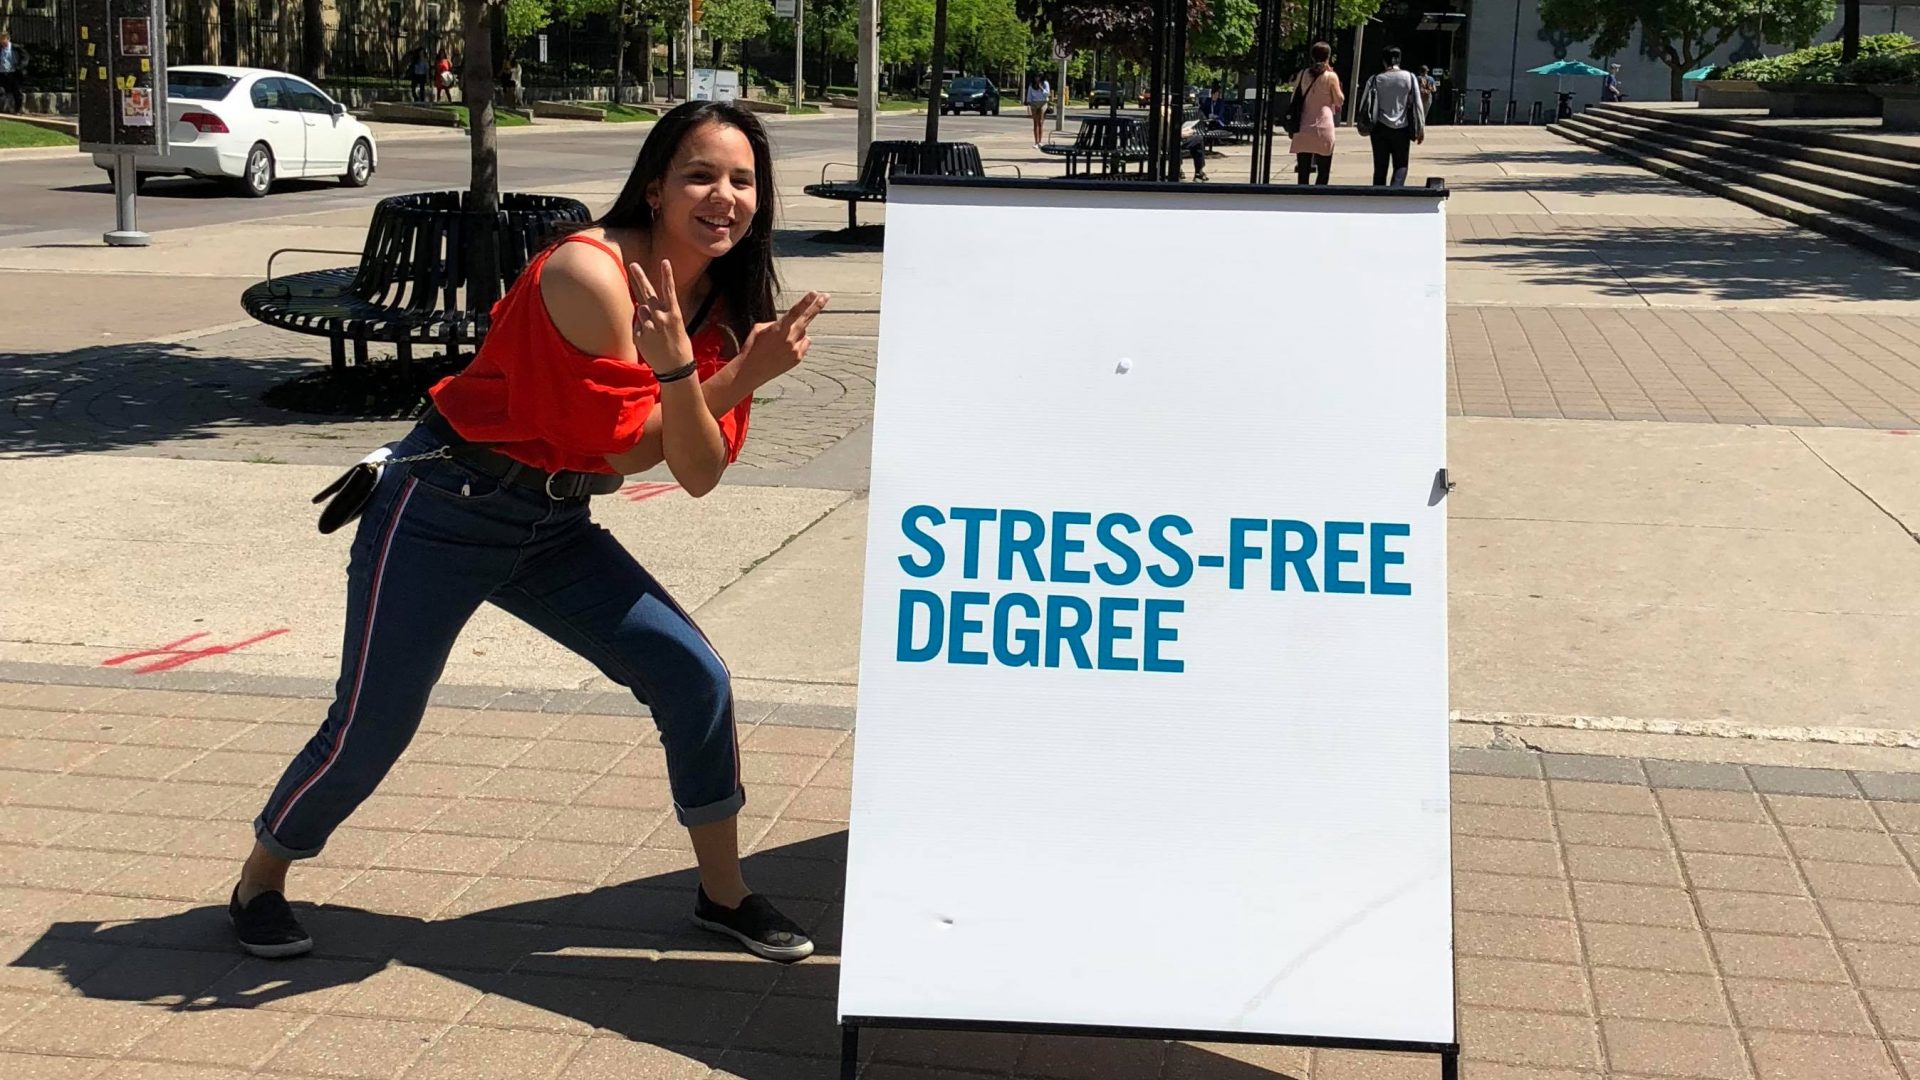 Future student in front of "stress-free degree" sign